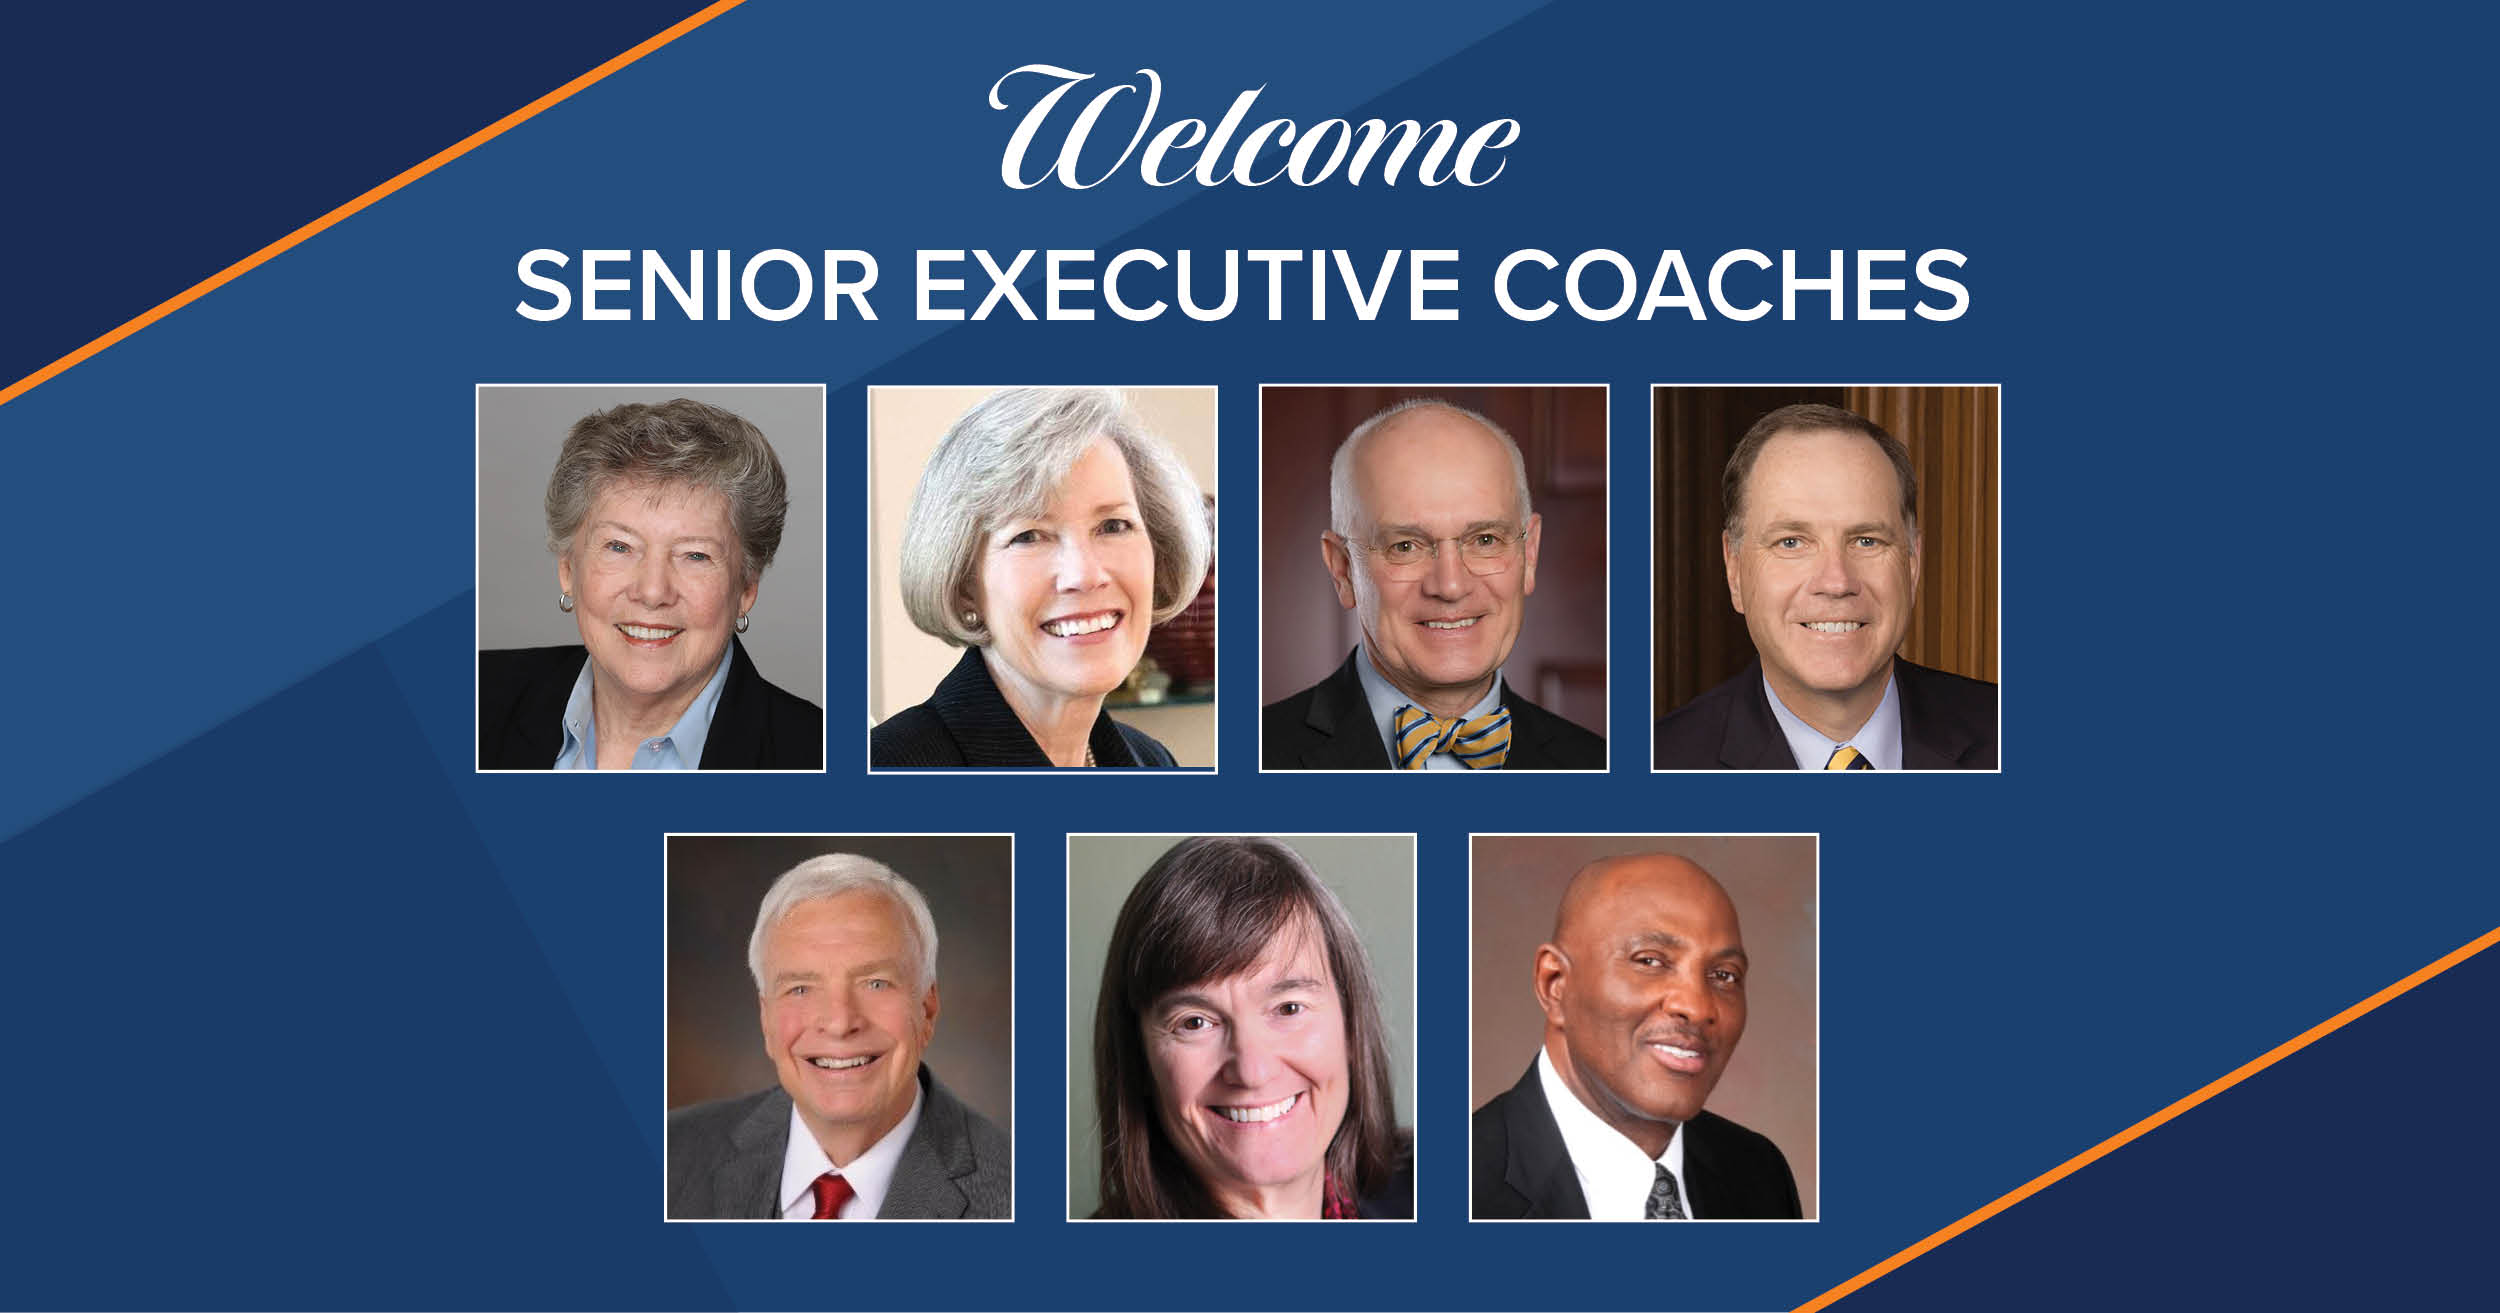 Academic Search Welcomes New Executive Coaches